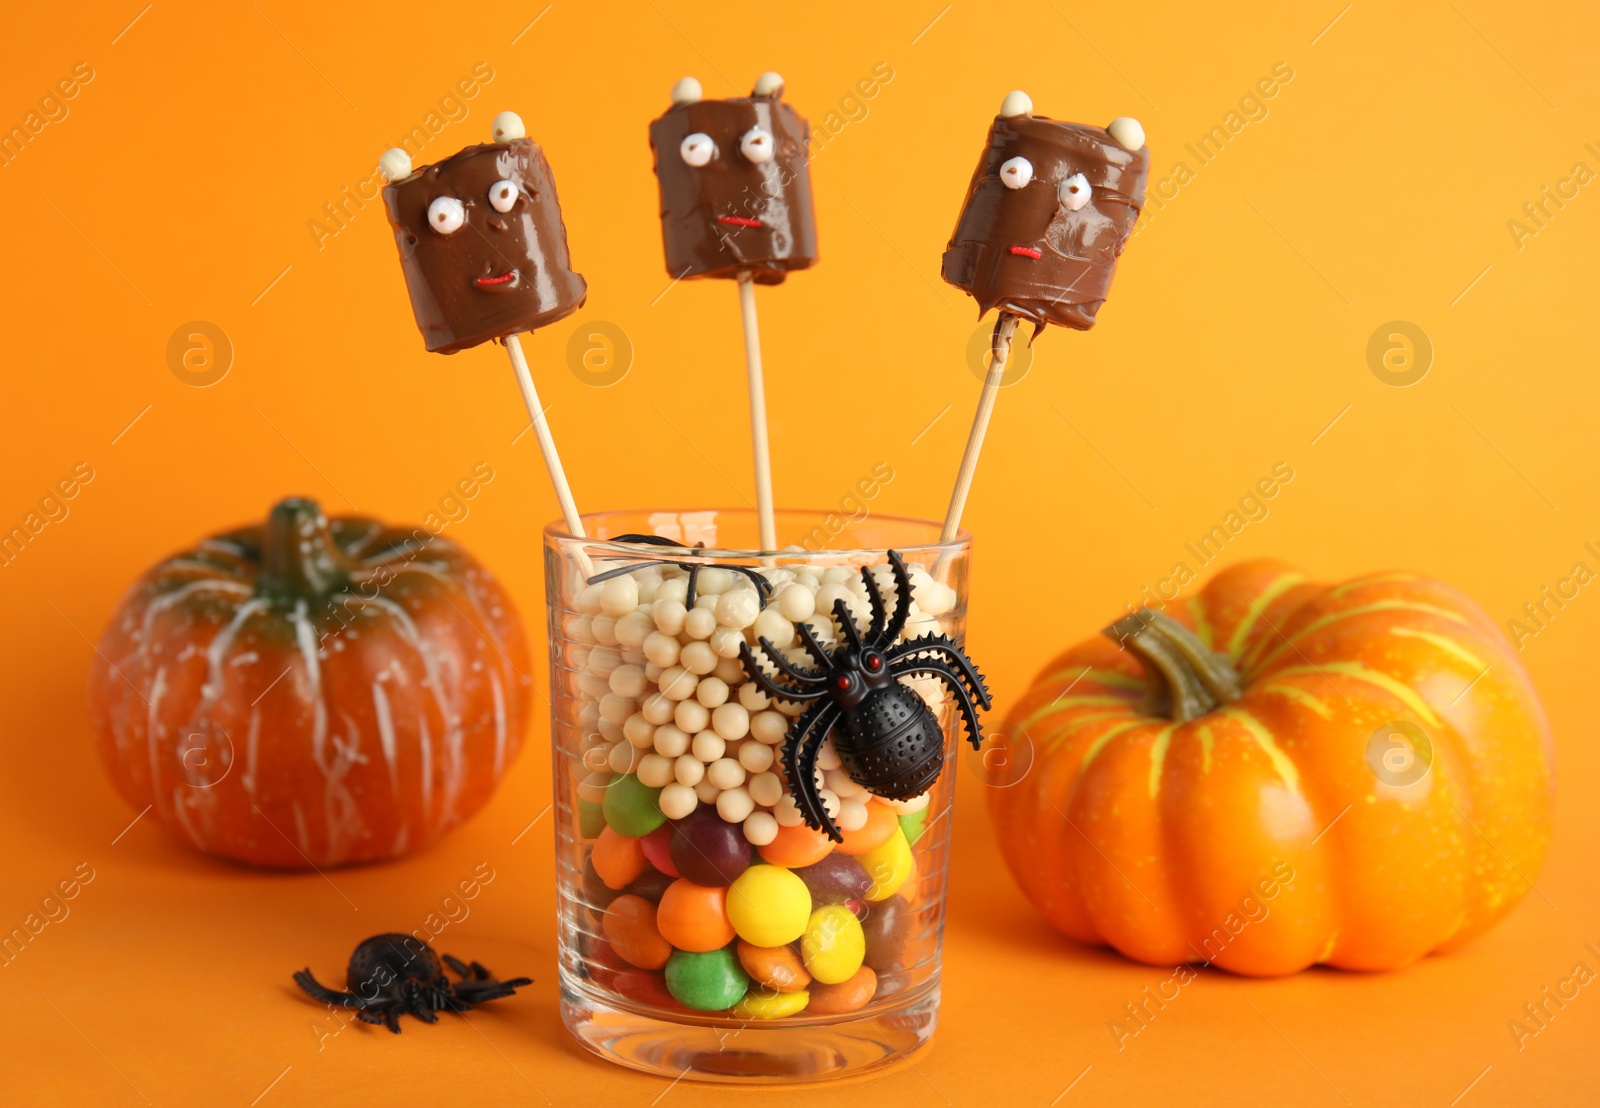 Photo of Delicious candies decorated as monsters on orange background. Halloween treat